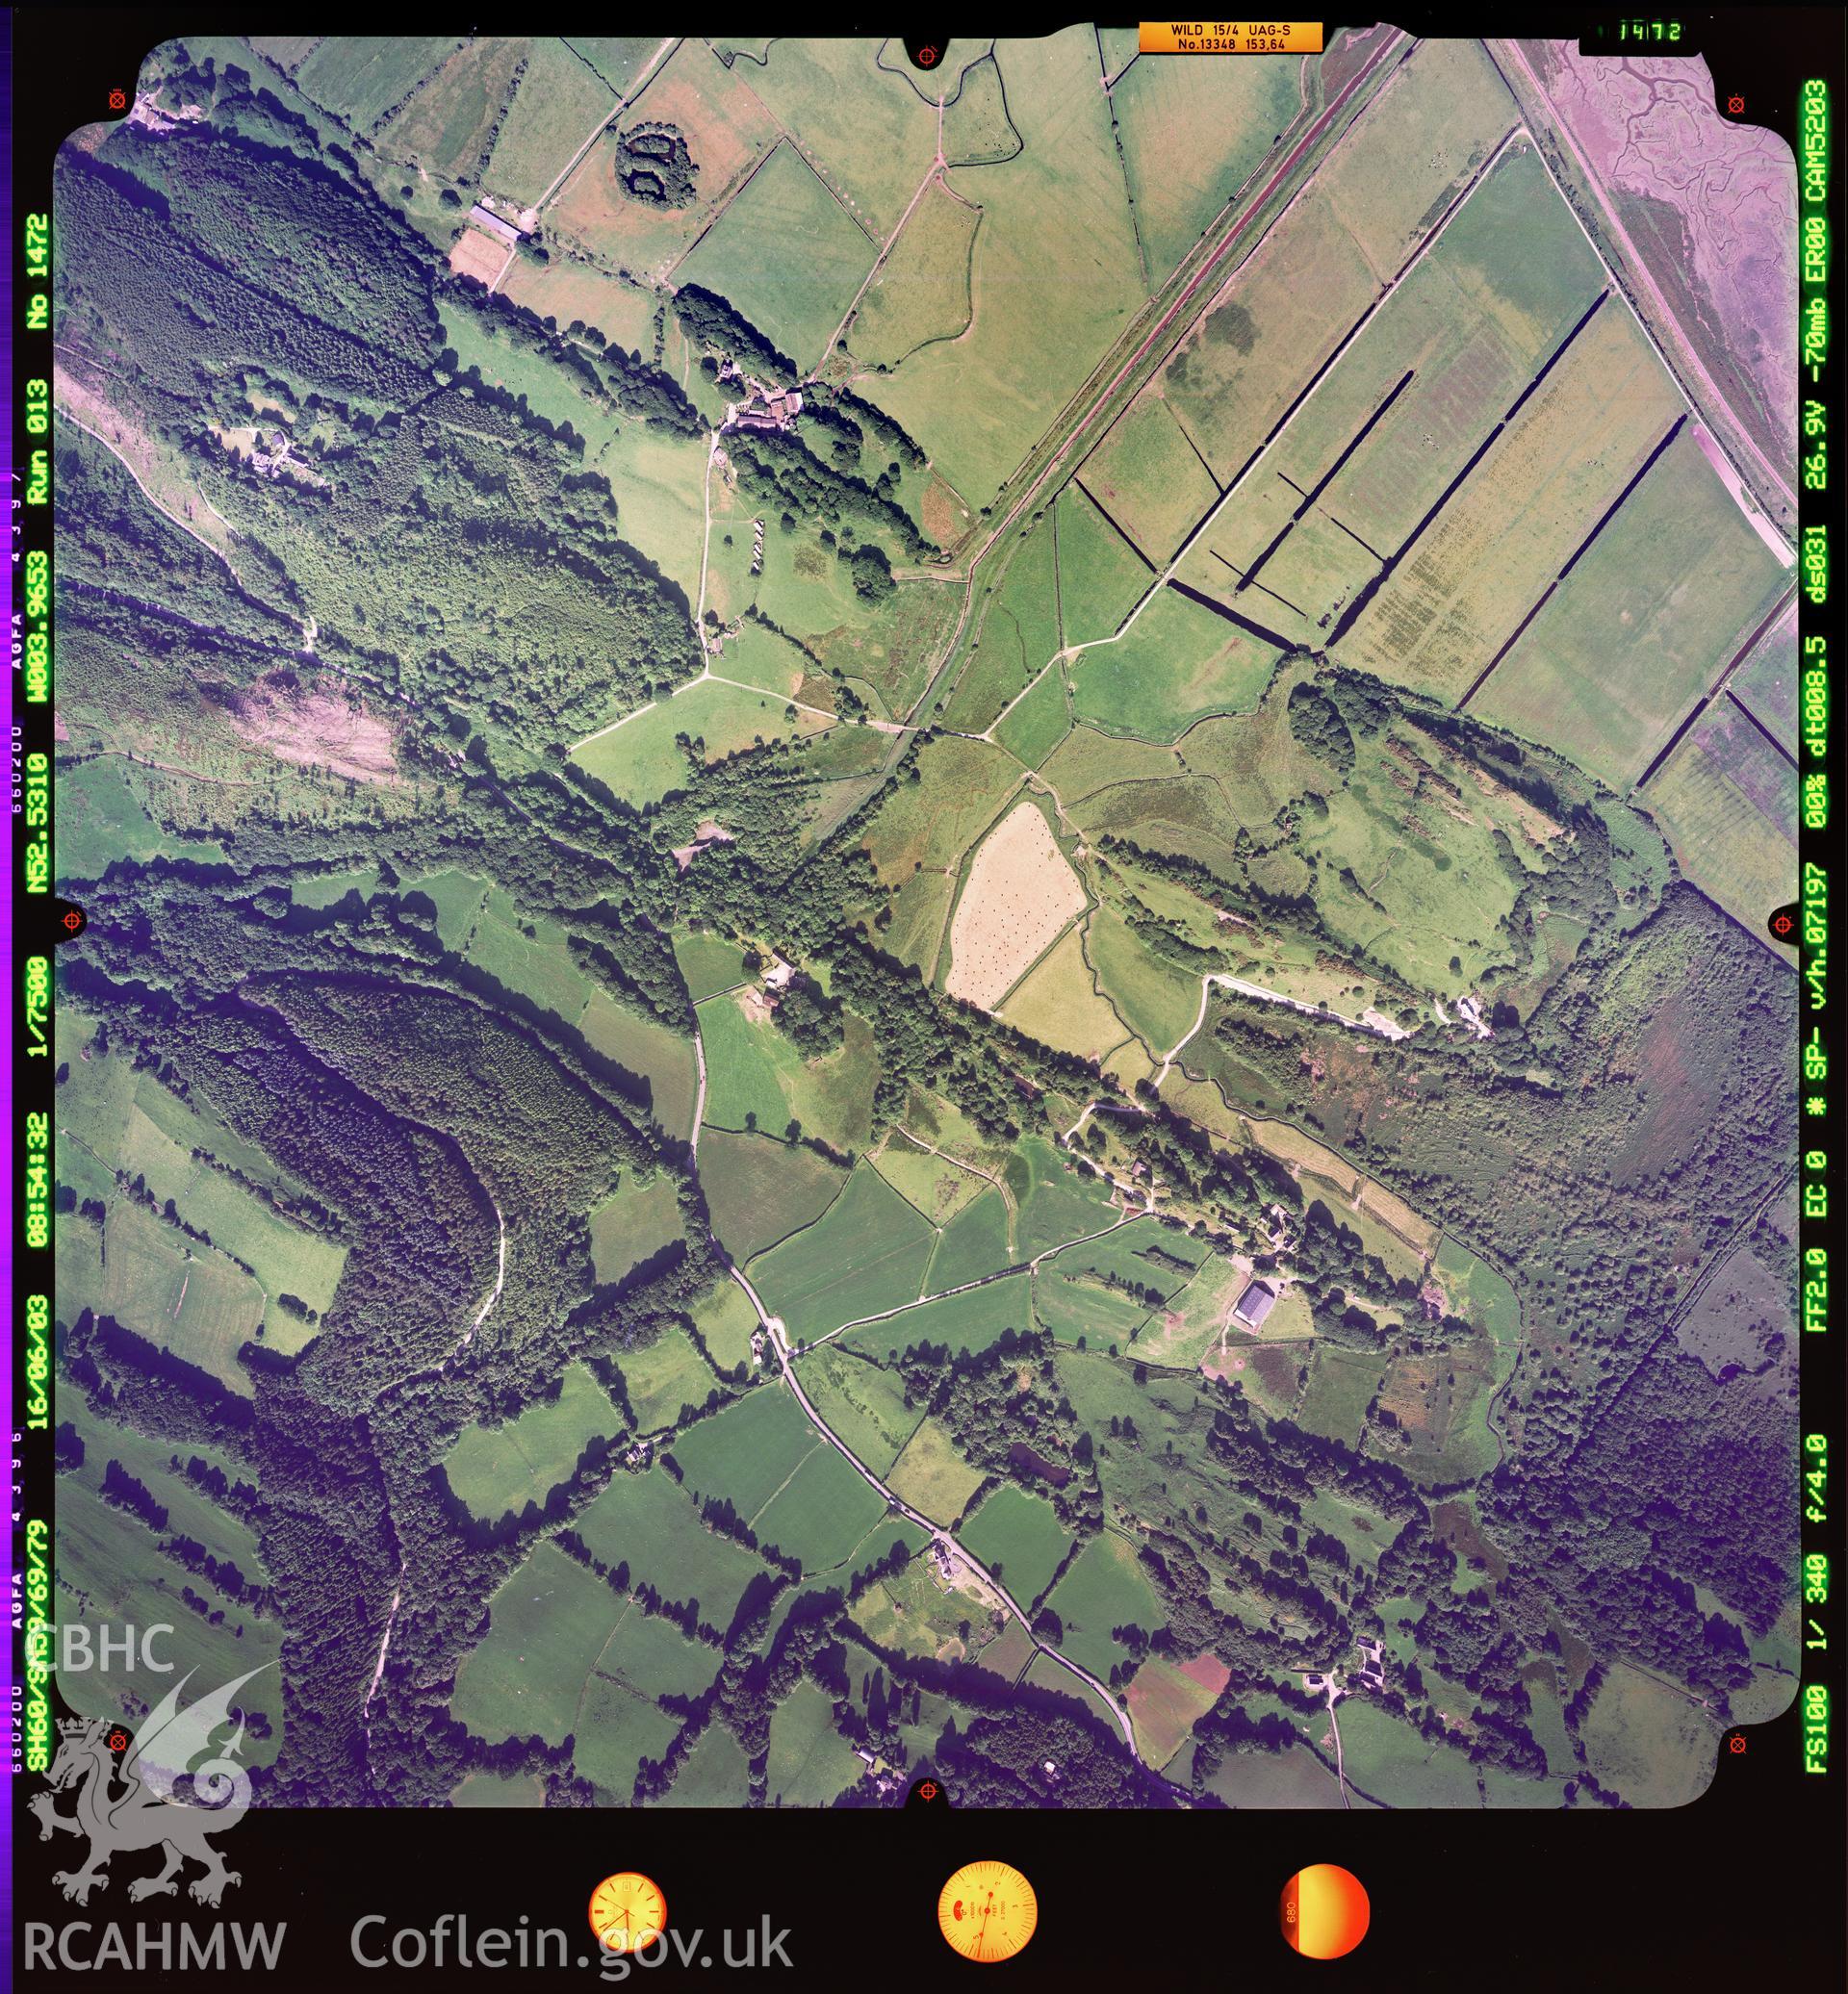 Digitized copy of a colour aerial photograph showing the area around Ysgubor y Coed, Ceredigion, taken by Ordnance Survey, 2003.